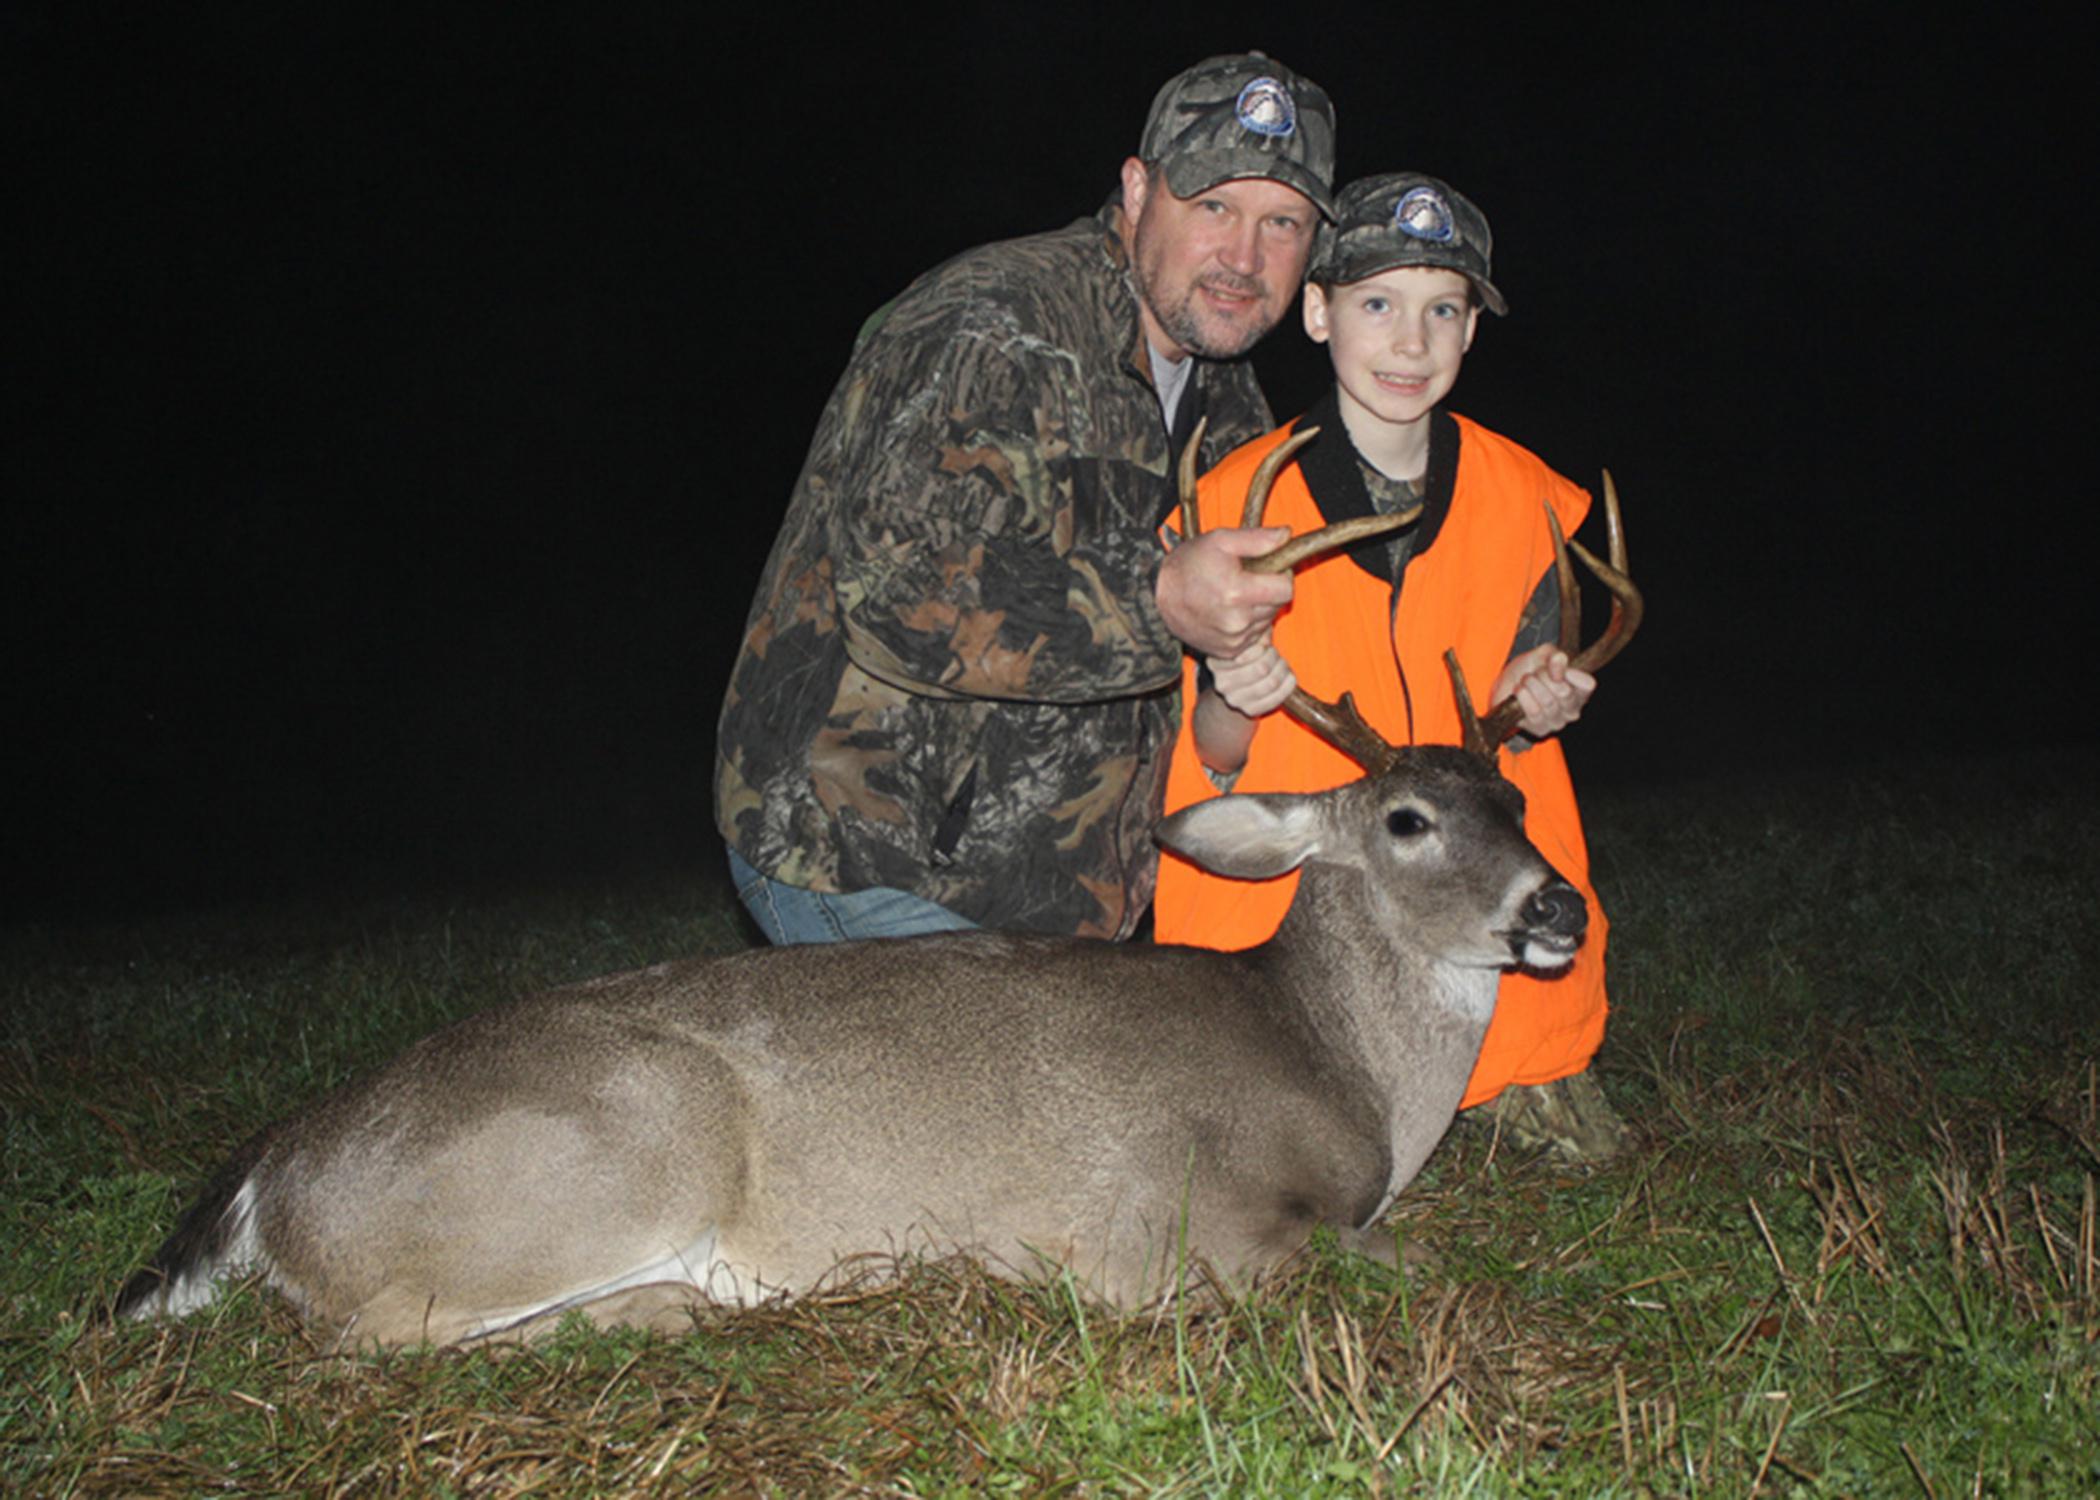 Jacob of West Virginia, pictured with his dad, Jeff, sported the required minimum of 500 inches fluorescent orange for visibility and safety when he got his first-ever whitetail deer during his Catch-A-Dream hunt in Monticello, Mississippi. The Catch-A-Dream Foundation provides outdoor experiences for children with life-threatening illnesses. (Photo courtesy of the Catch-A-Dream Foundation)